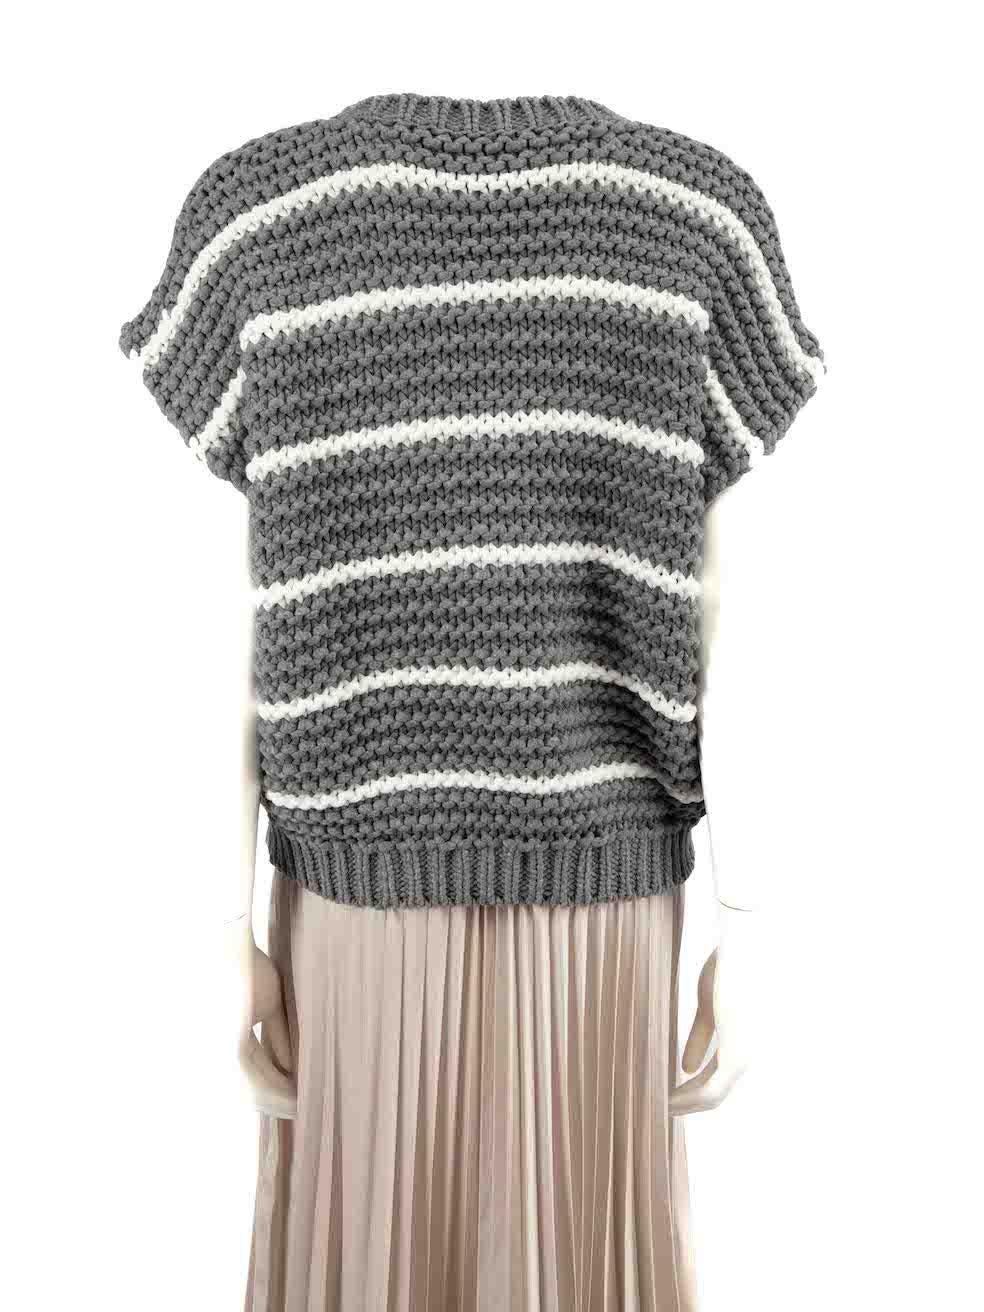 Brunello Cucinelli Grey Chunky Knit Stripe Top Size M In Good Condition For Sale In London, GB